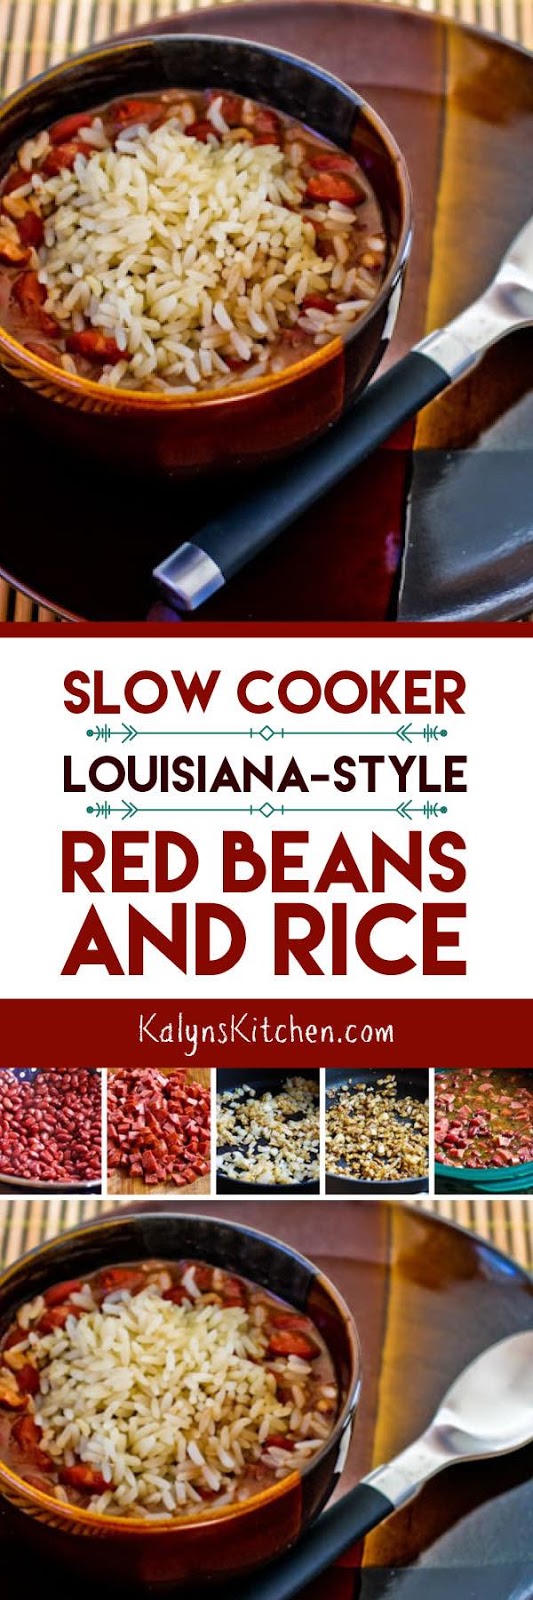 Slow Cooker Louisiana-Style Red Beans and Rice - Kalyn's Kitchen